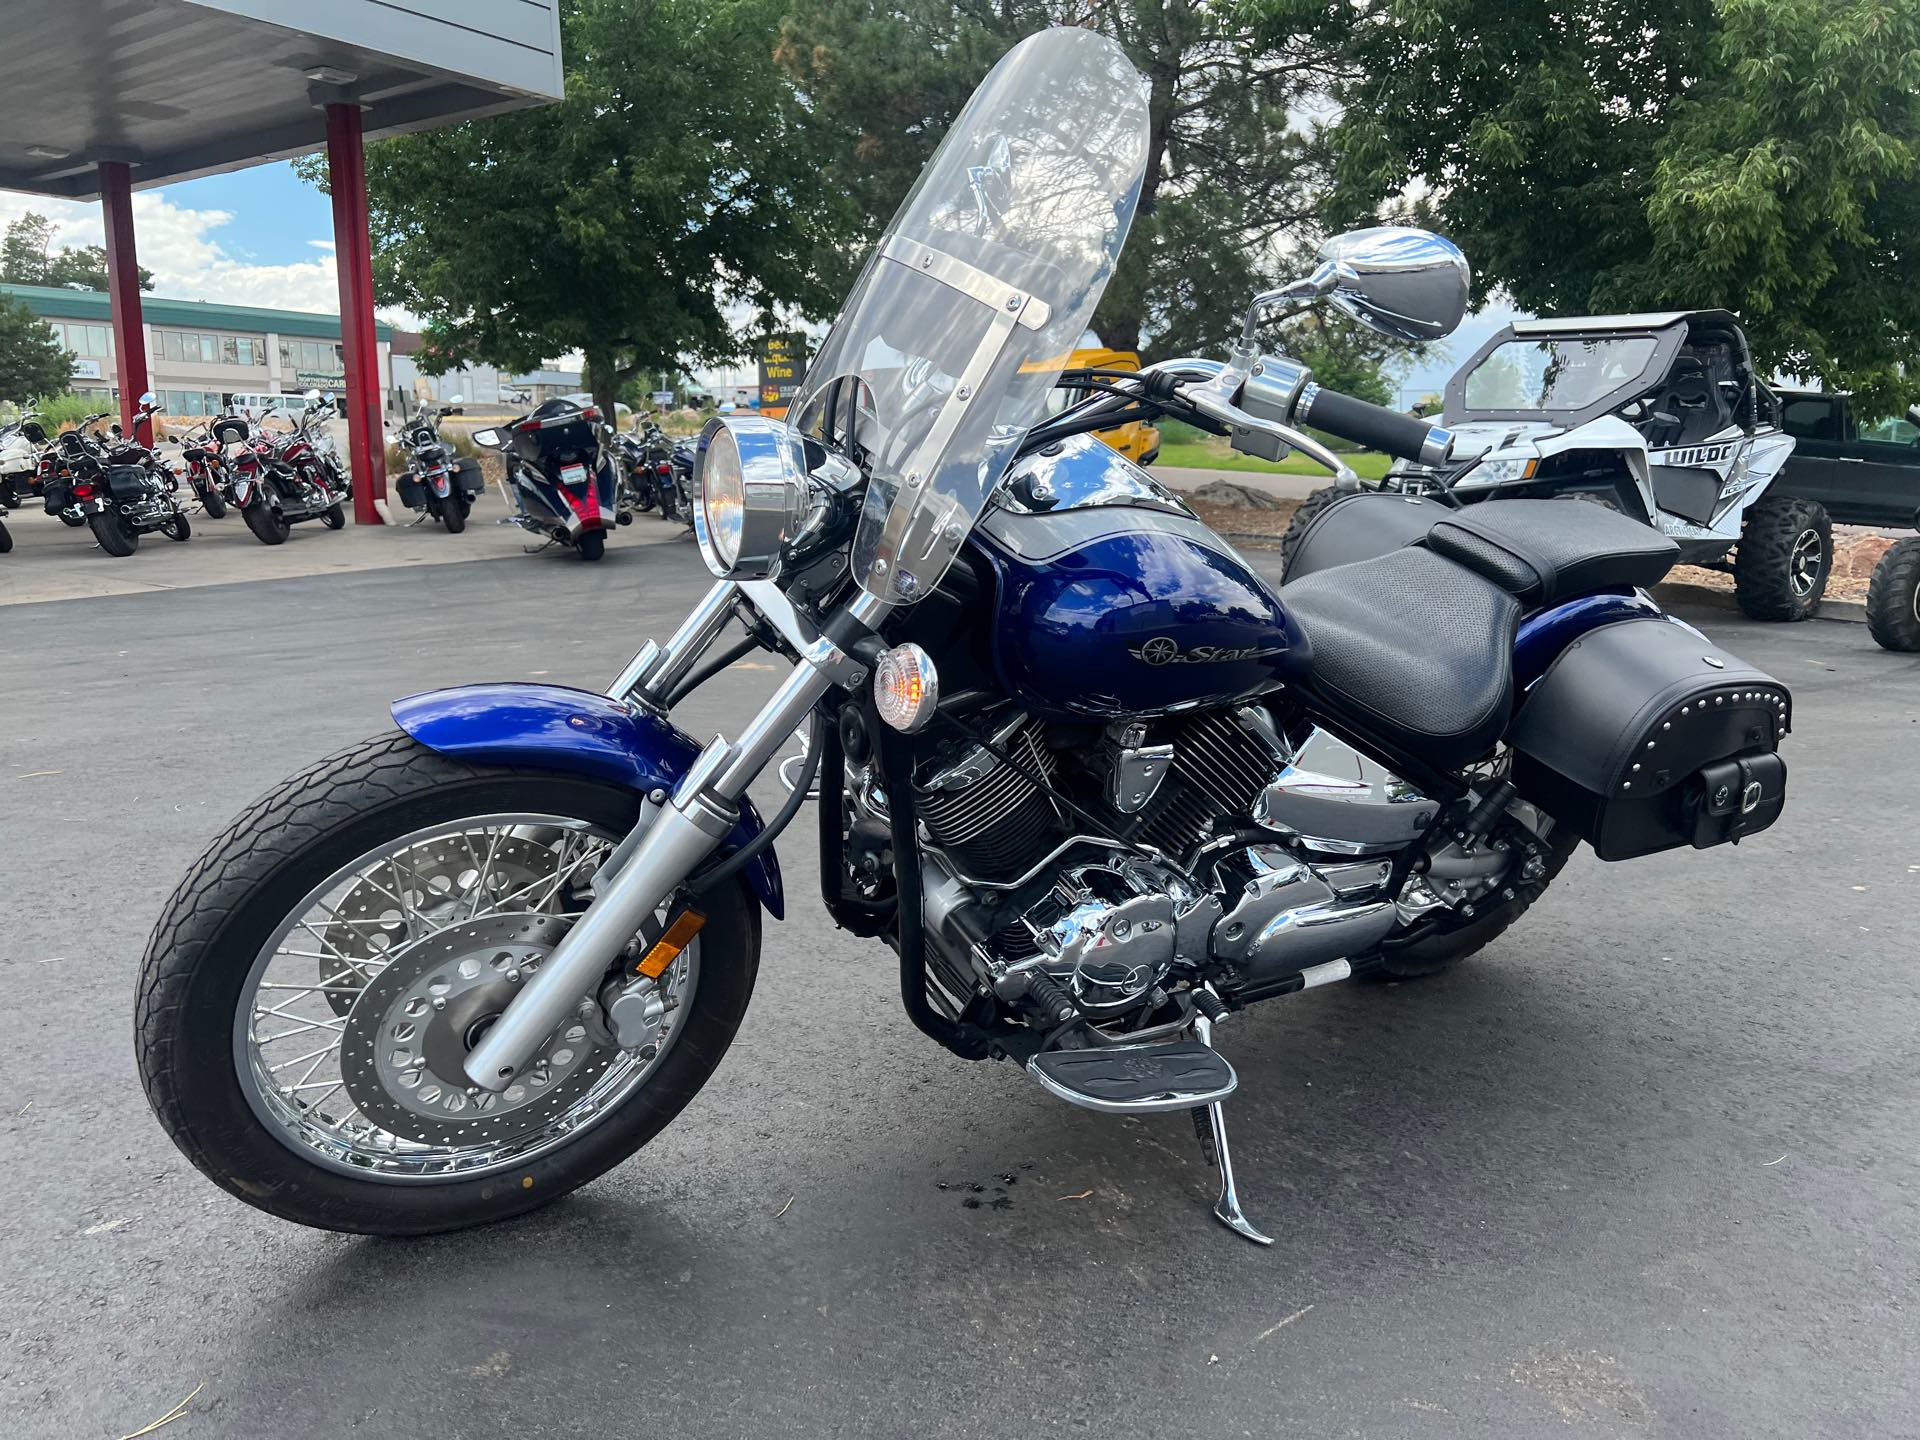 2008 Yamaha V Star 1100 Custom at Aces Motorcycles - Fort Collins